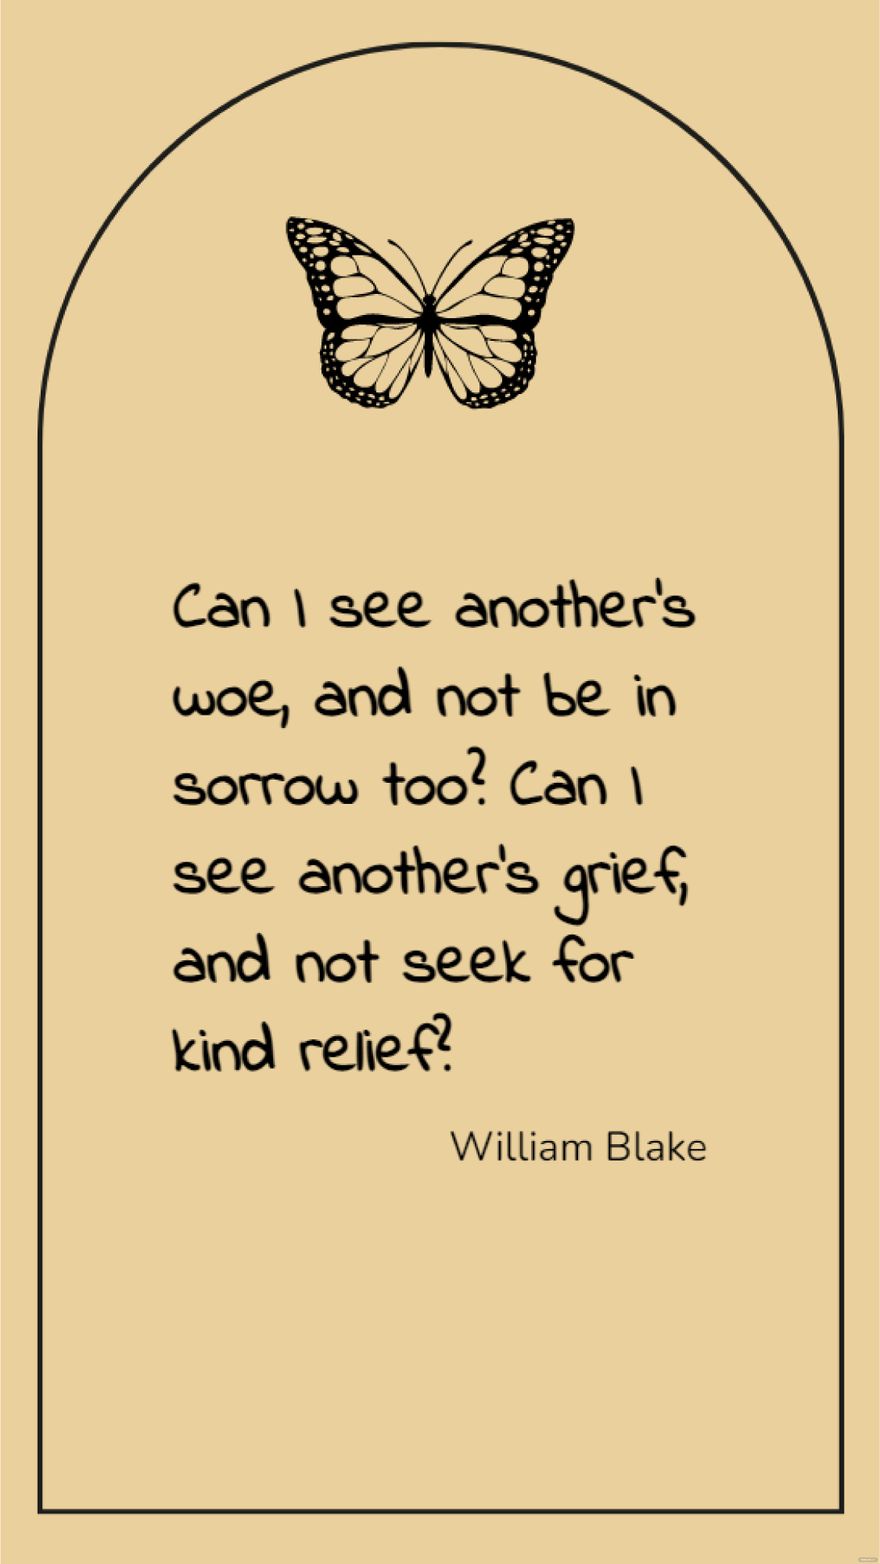 William Blake - Can I see another's woe, and not be in sorrow too? Can I see another's grief, and not seek for kind relief?